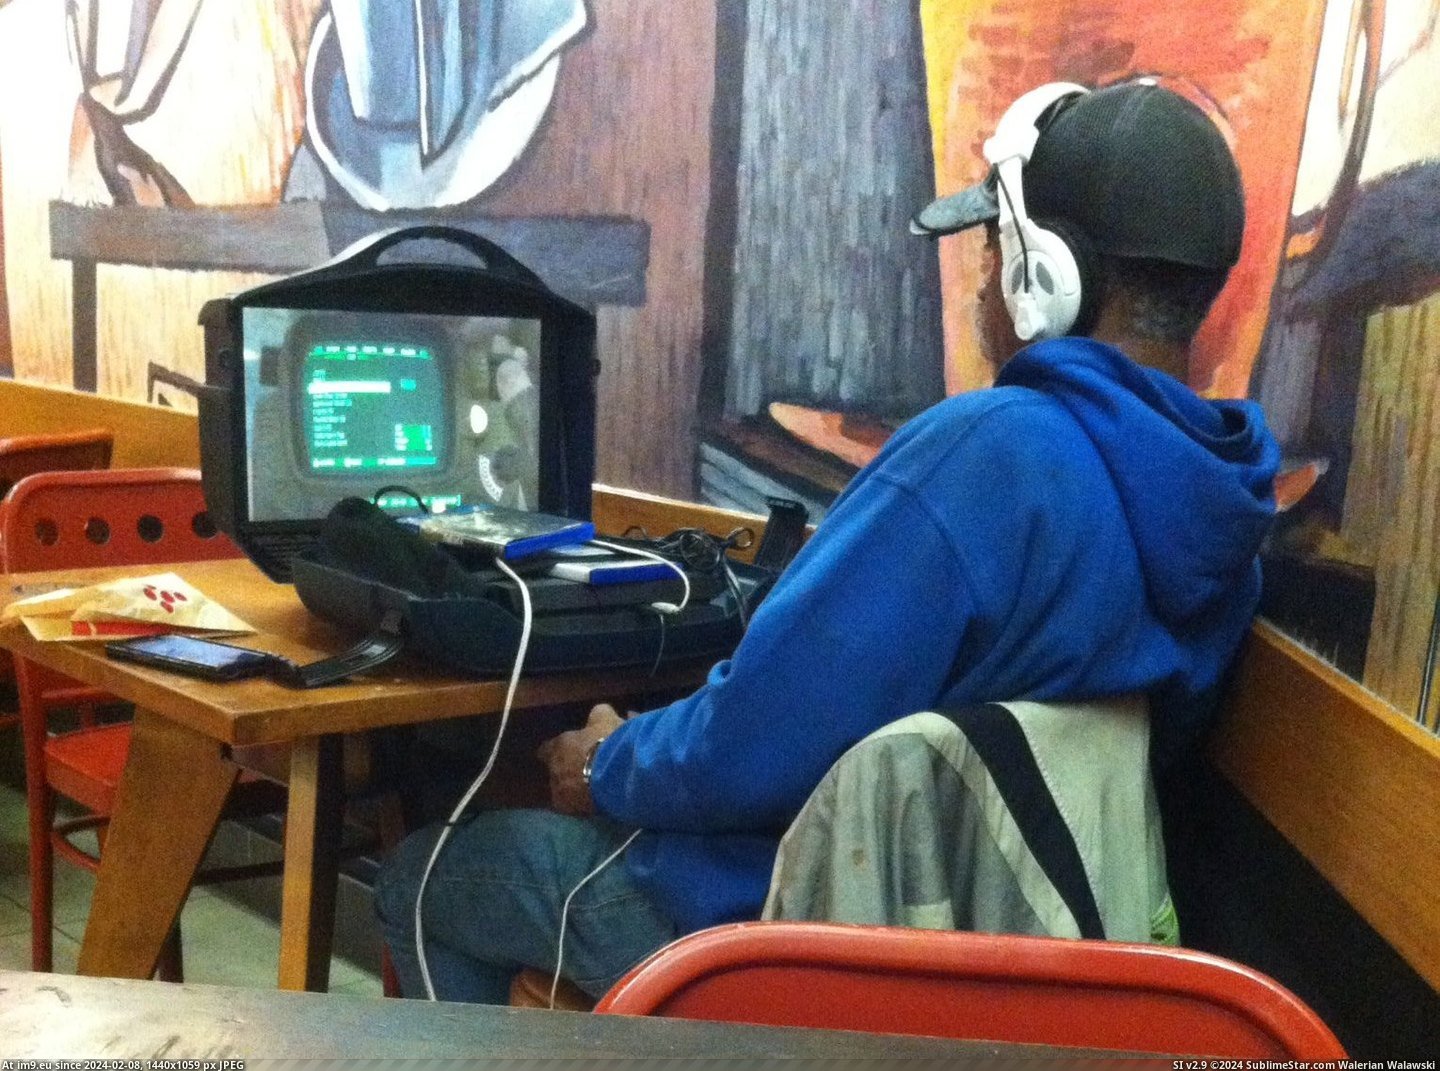 [Gaming] Dude's got a portable PS4 station in Starbucks. Am I just out of the loop? Never seen this. (in My r/GAMING favs)